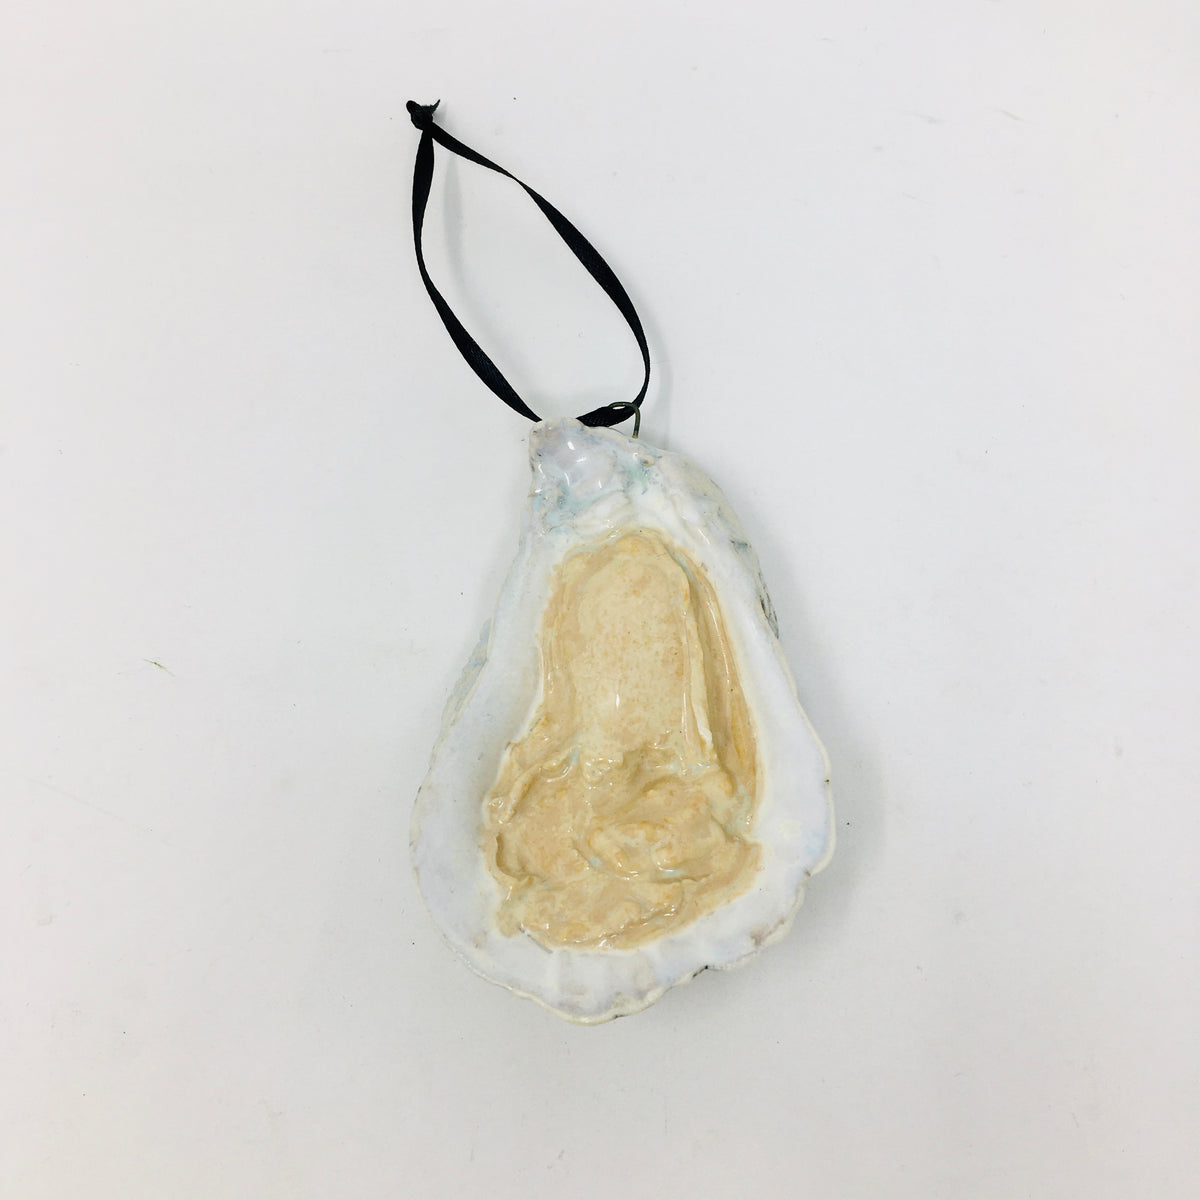 Oyster Ornament